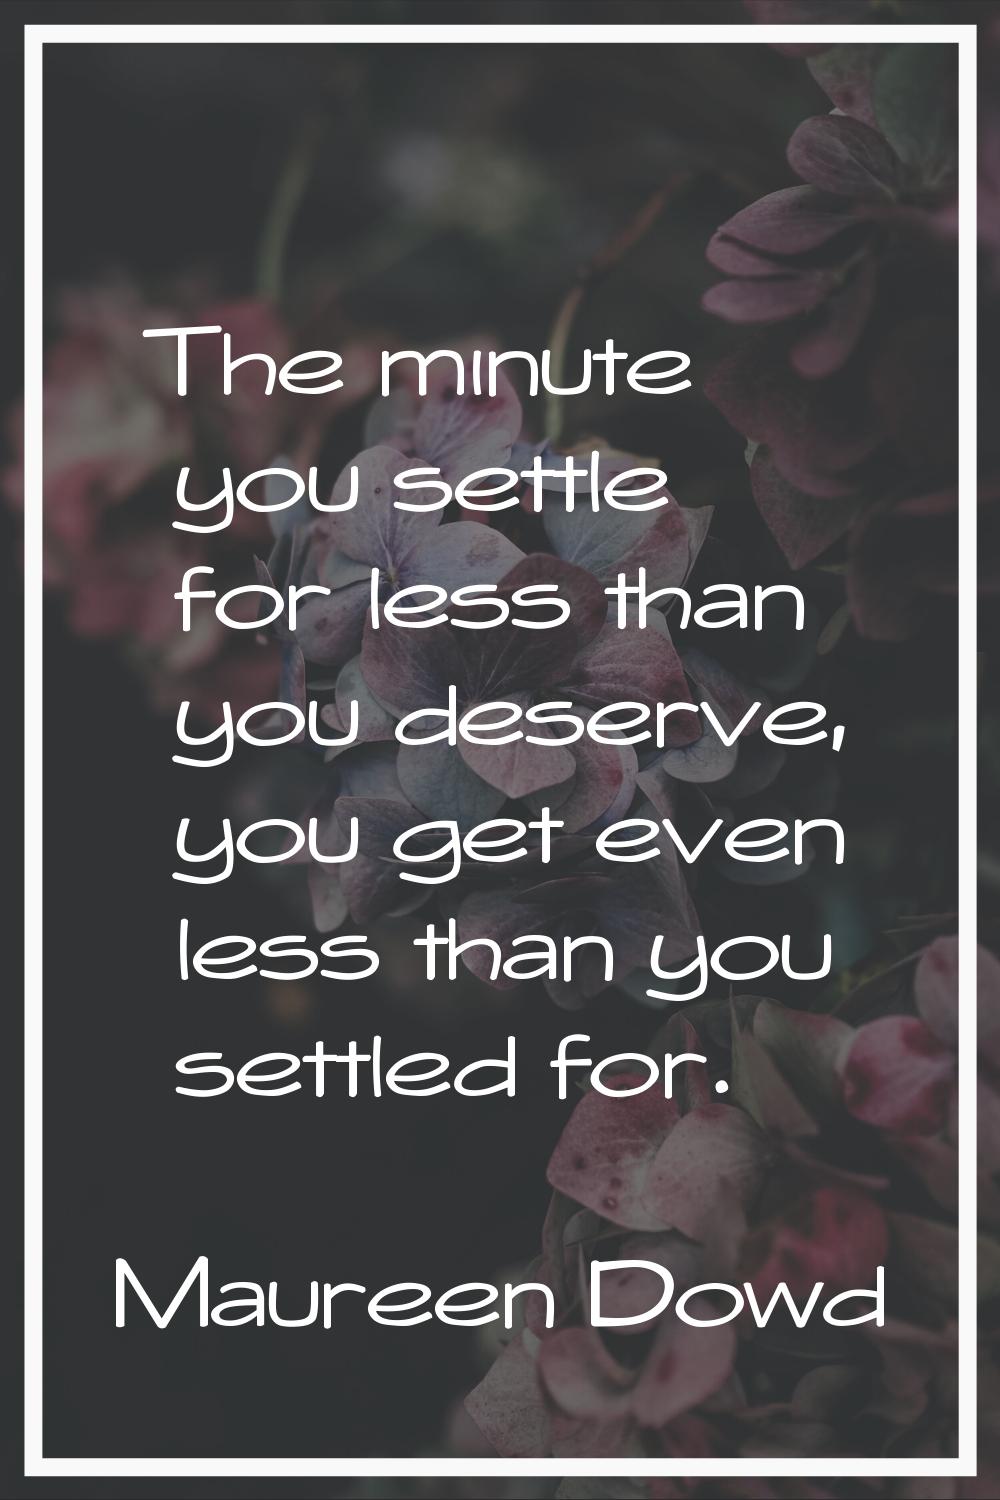 The minute you settle for less than you deserve, you get even less than you settled for.